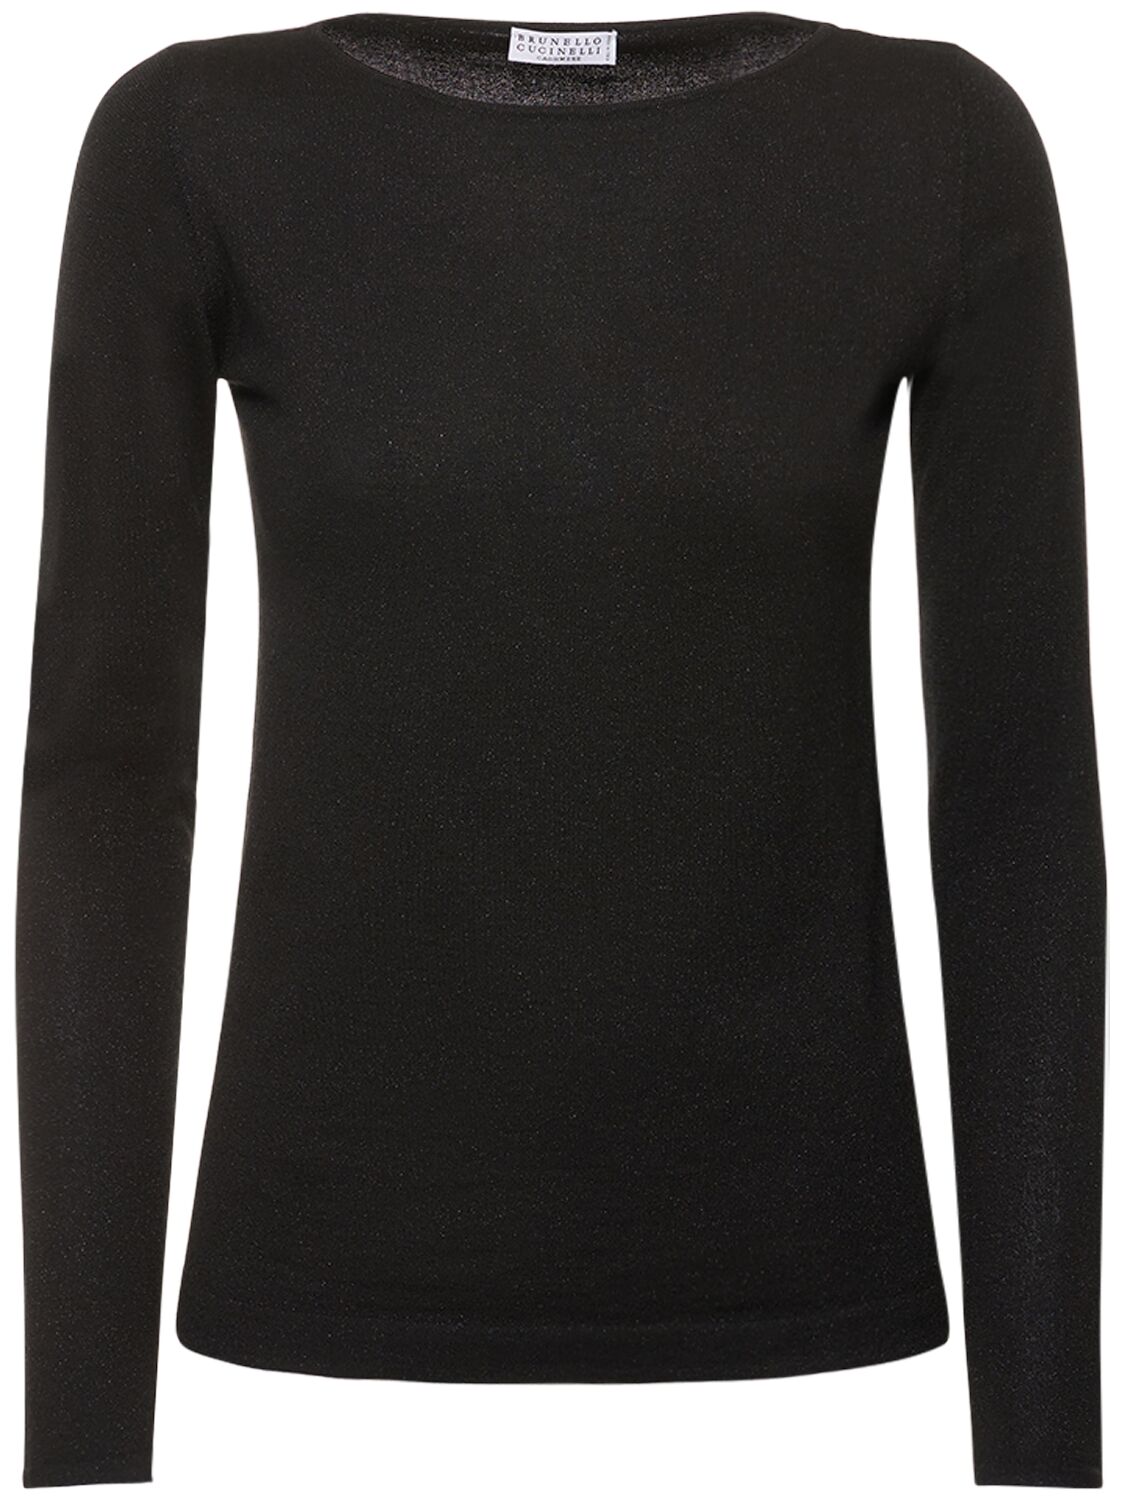 Image of Boat Neck Cashmere & Lurex Knit Sweater